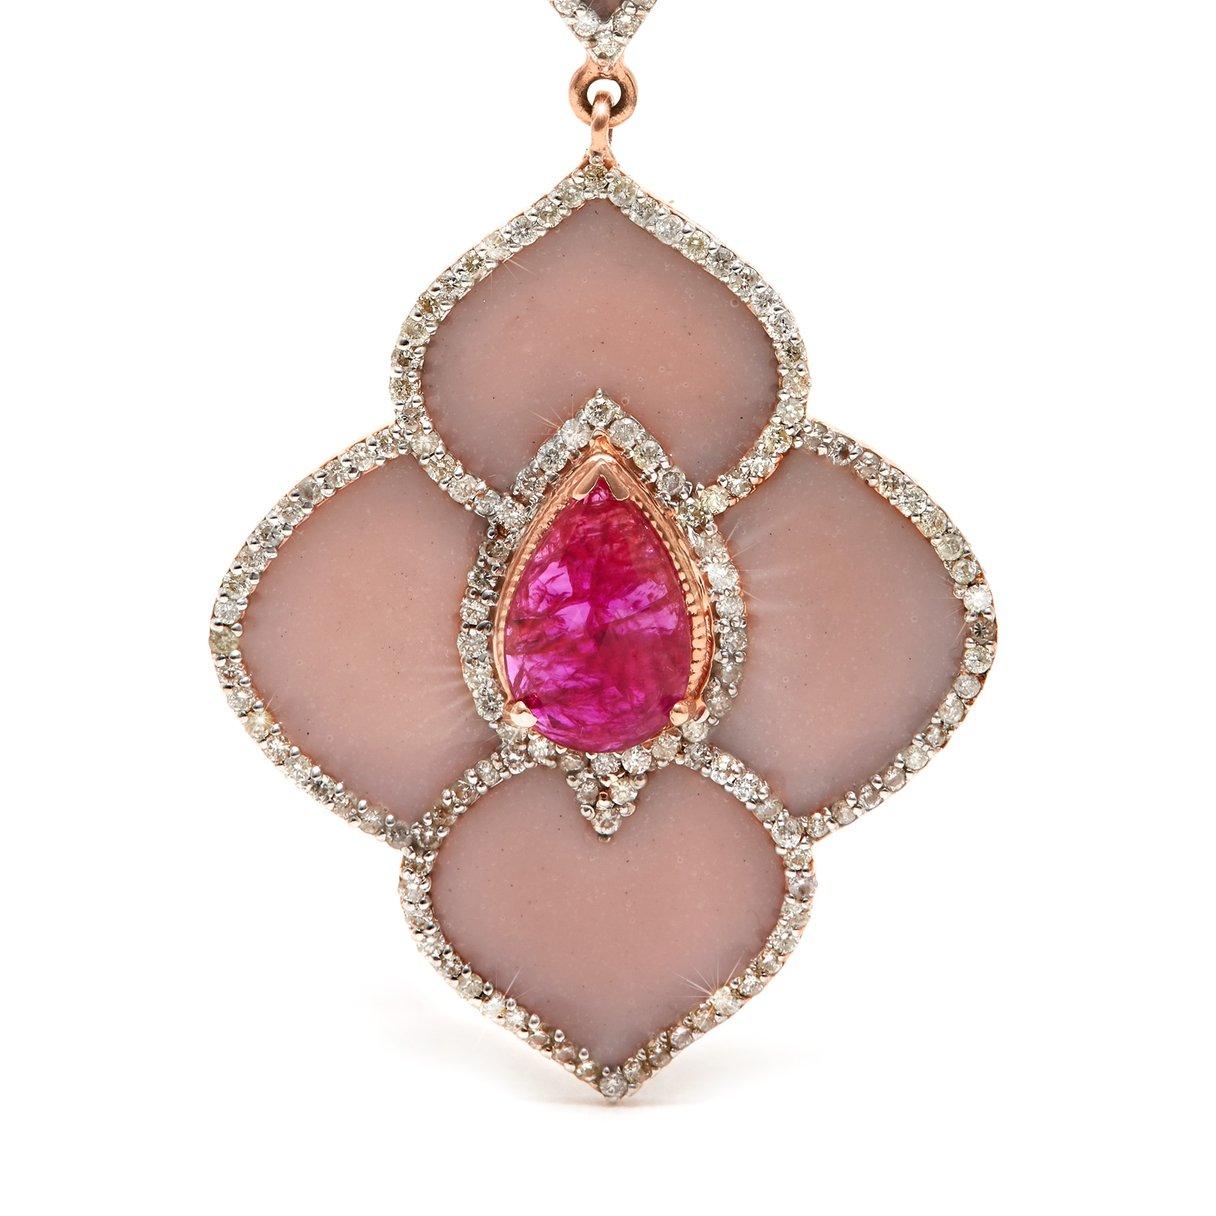 The exceptional fire of natural, unheated Mozambique Pink Rubies against a backdrop of cool Rose Pink enamel drop earrings with softly sloping curved edges accented with Brilliant Cut White Diamonds. Breathtakingly gorgeous and the ultimate in